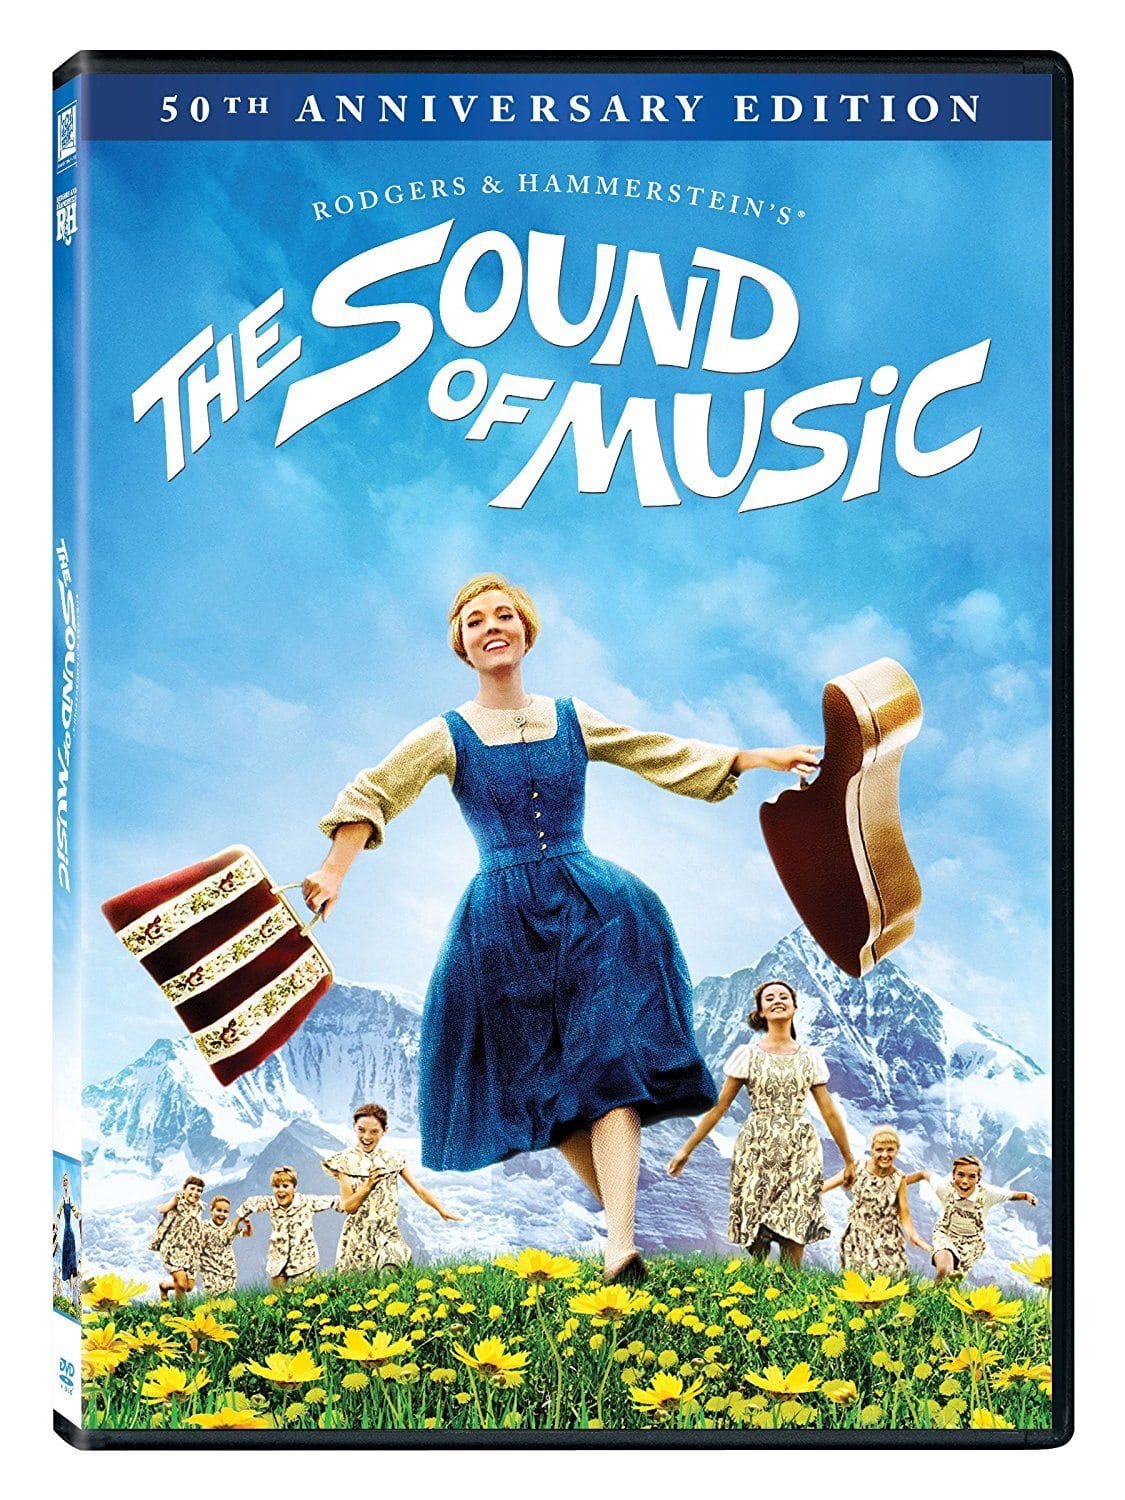 Best travel movies for kids - The Sound of Music